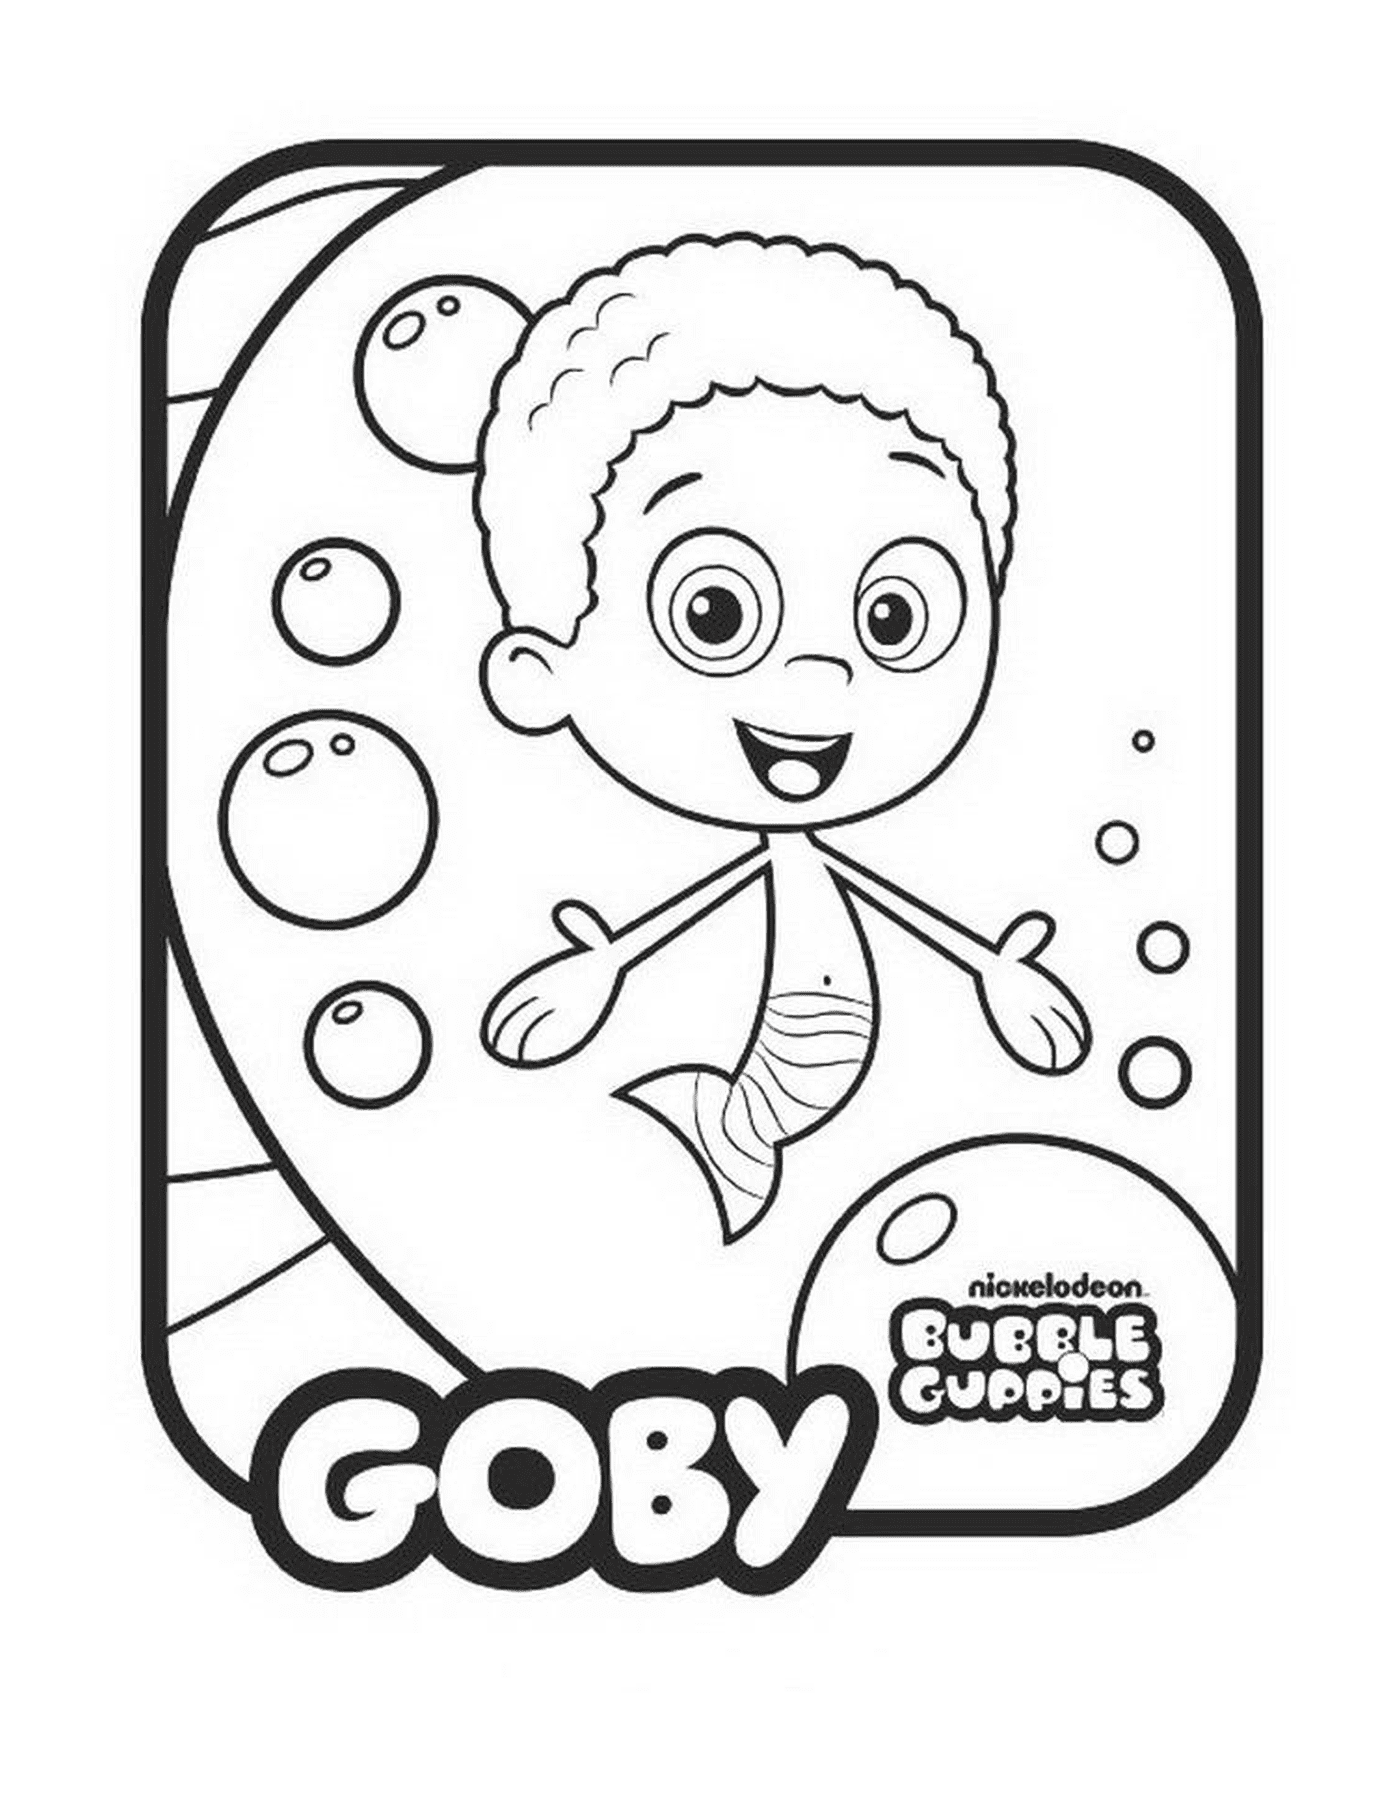  Goby of the Bubble Guppies 